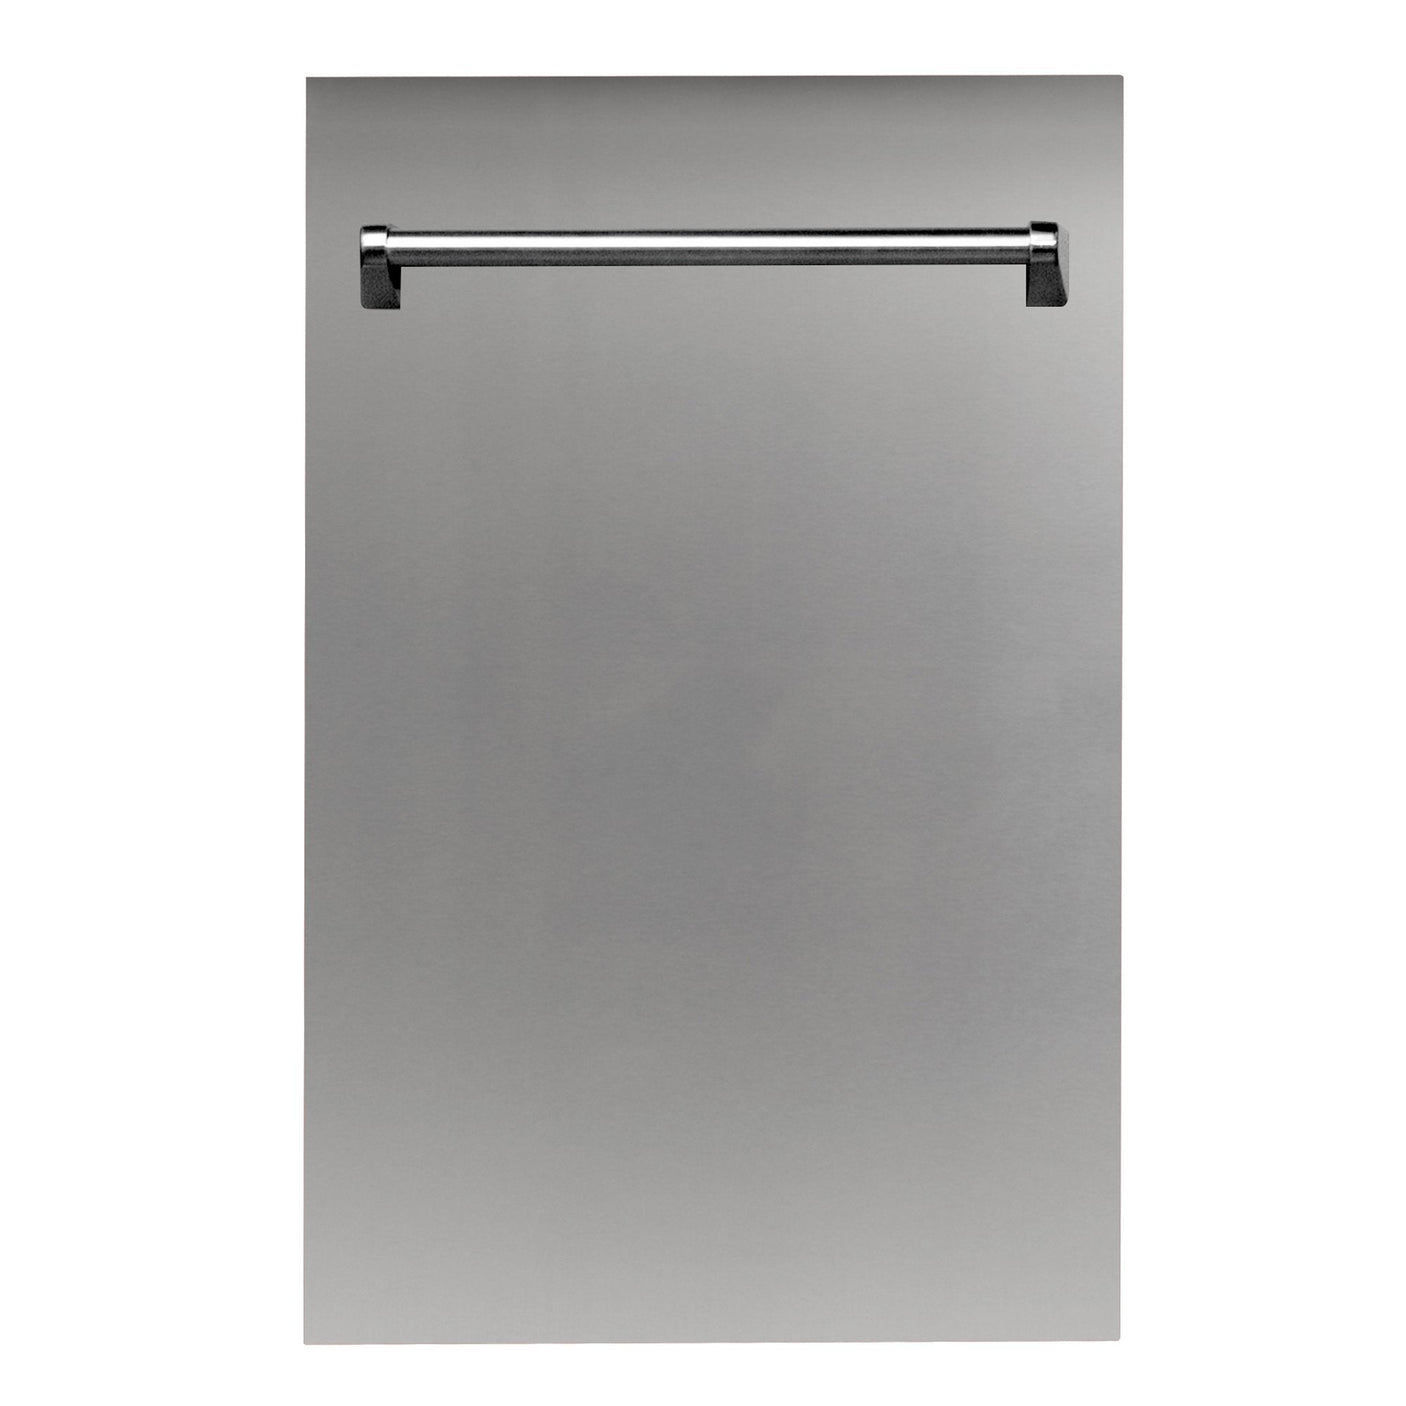 ZLINE 18 in. Dishwasher Panel with Traditional Handle (DP-18) [Color: DuraSnow Stainless Steel]